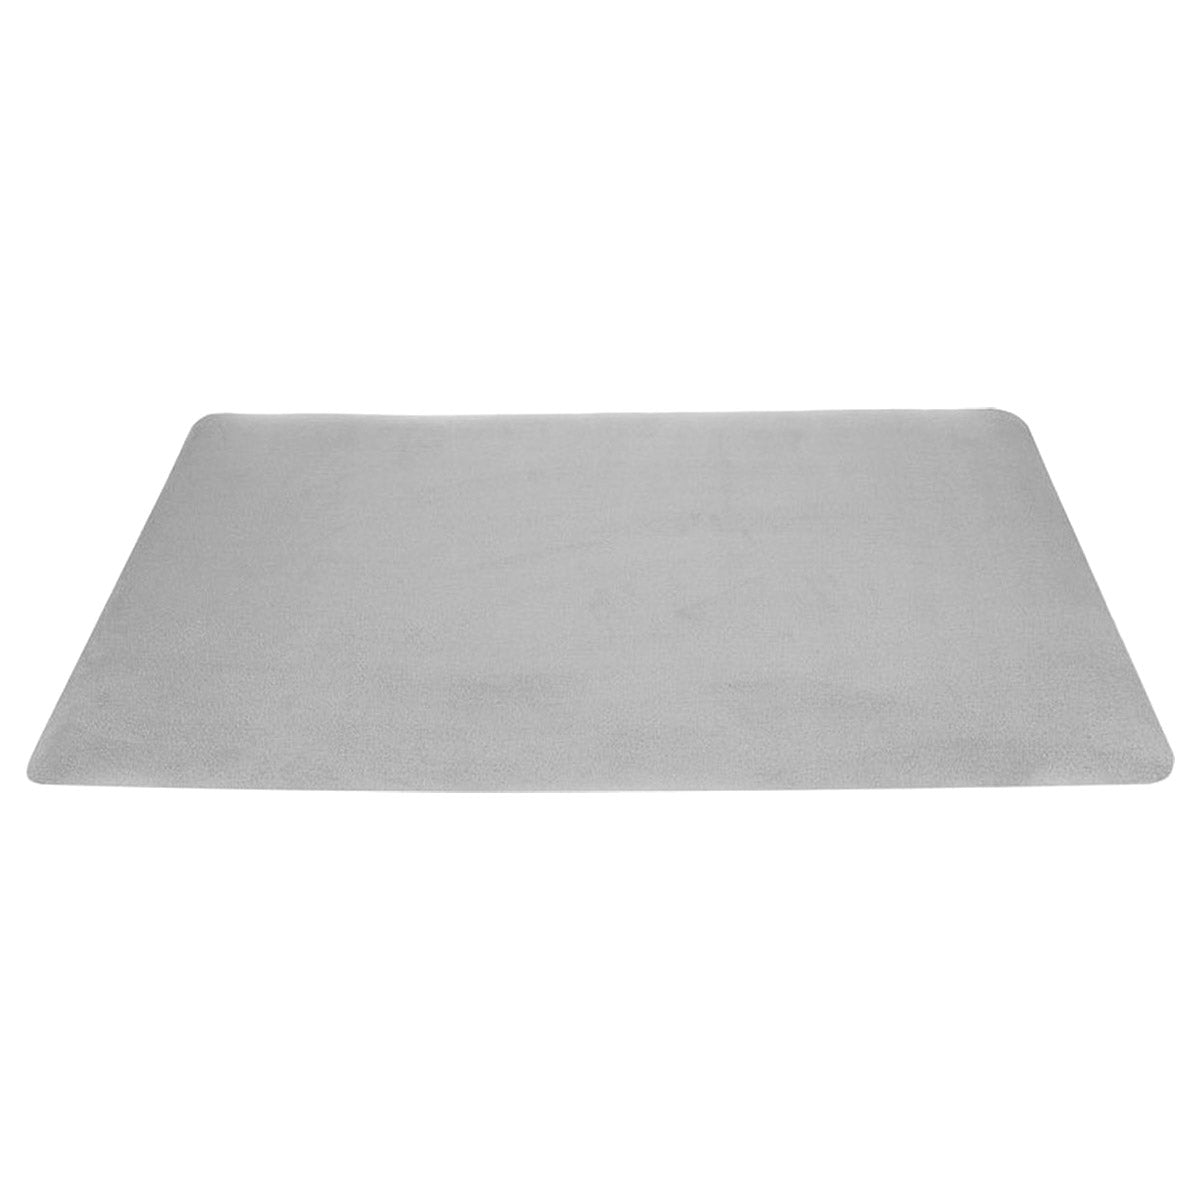 Design XL Mouse and Keyboard Desk Pad - Mouse Pad - Grey